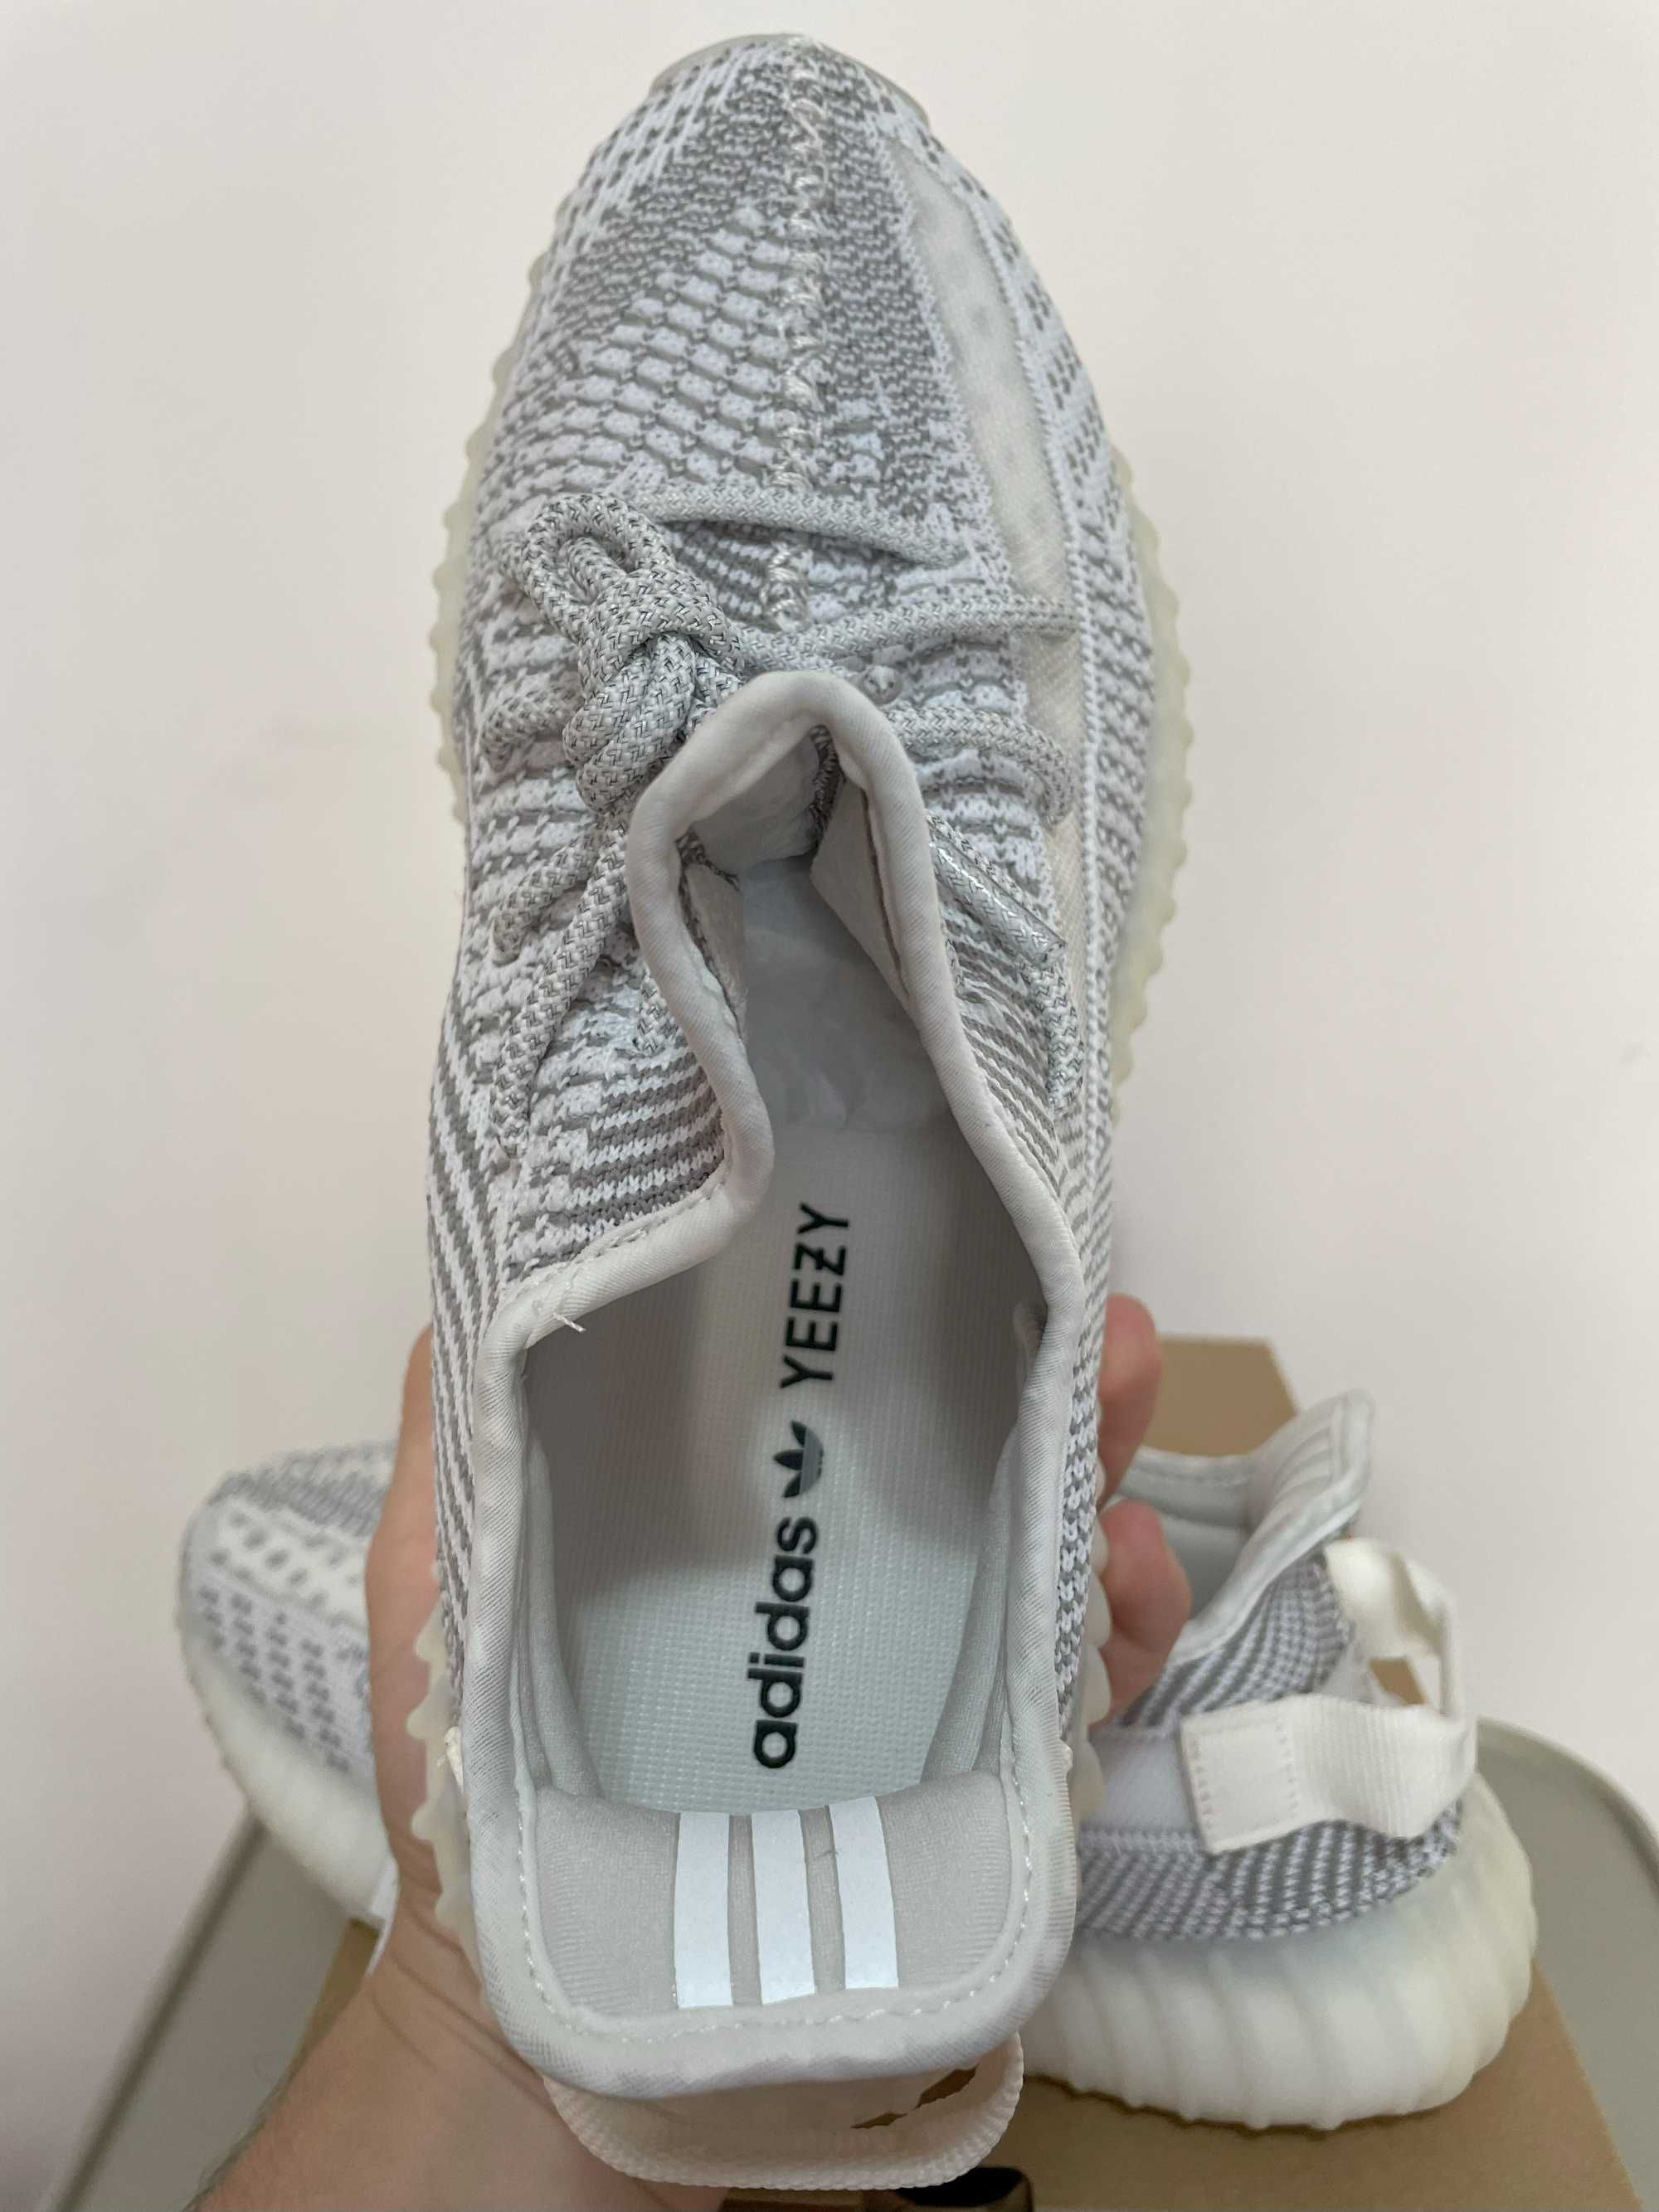 Yeezy Boost 350 V2 Static (Non-Reflective) 44